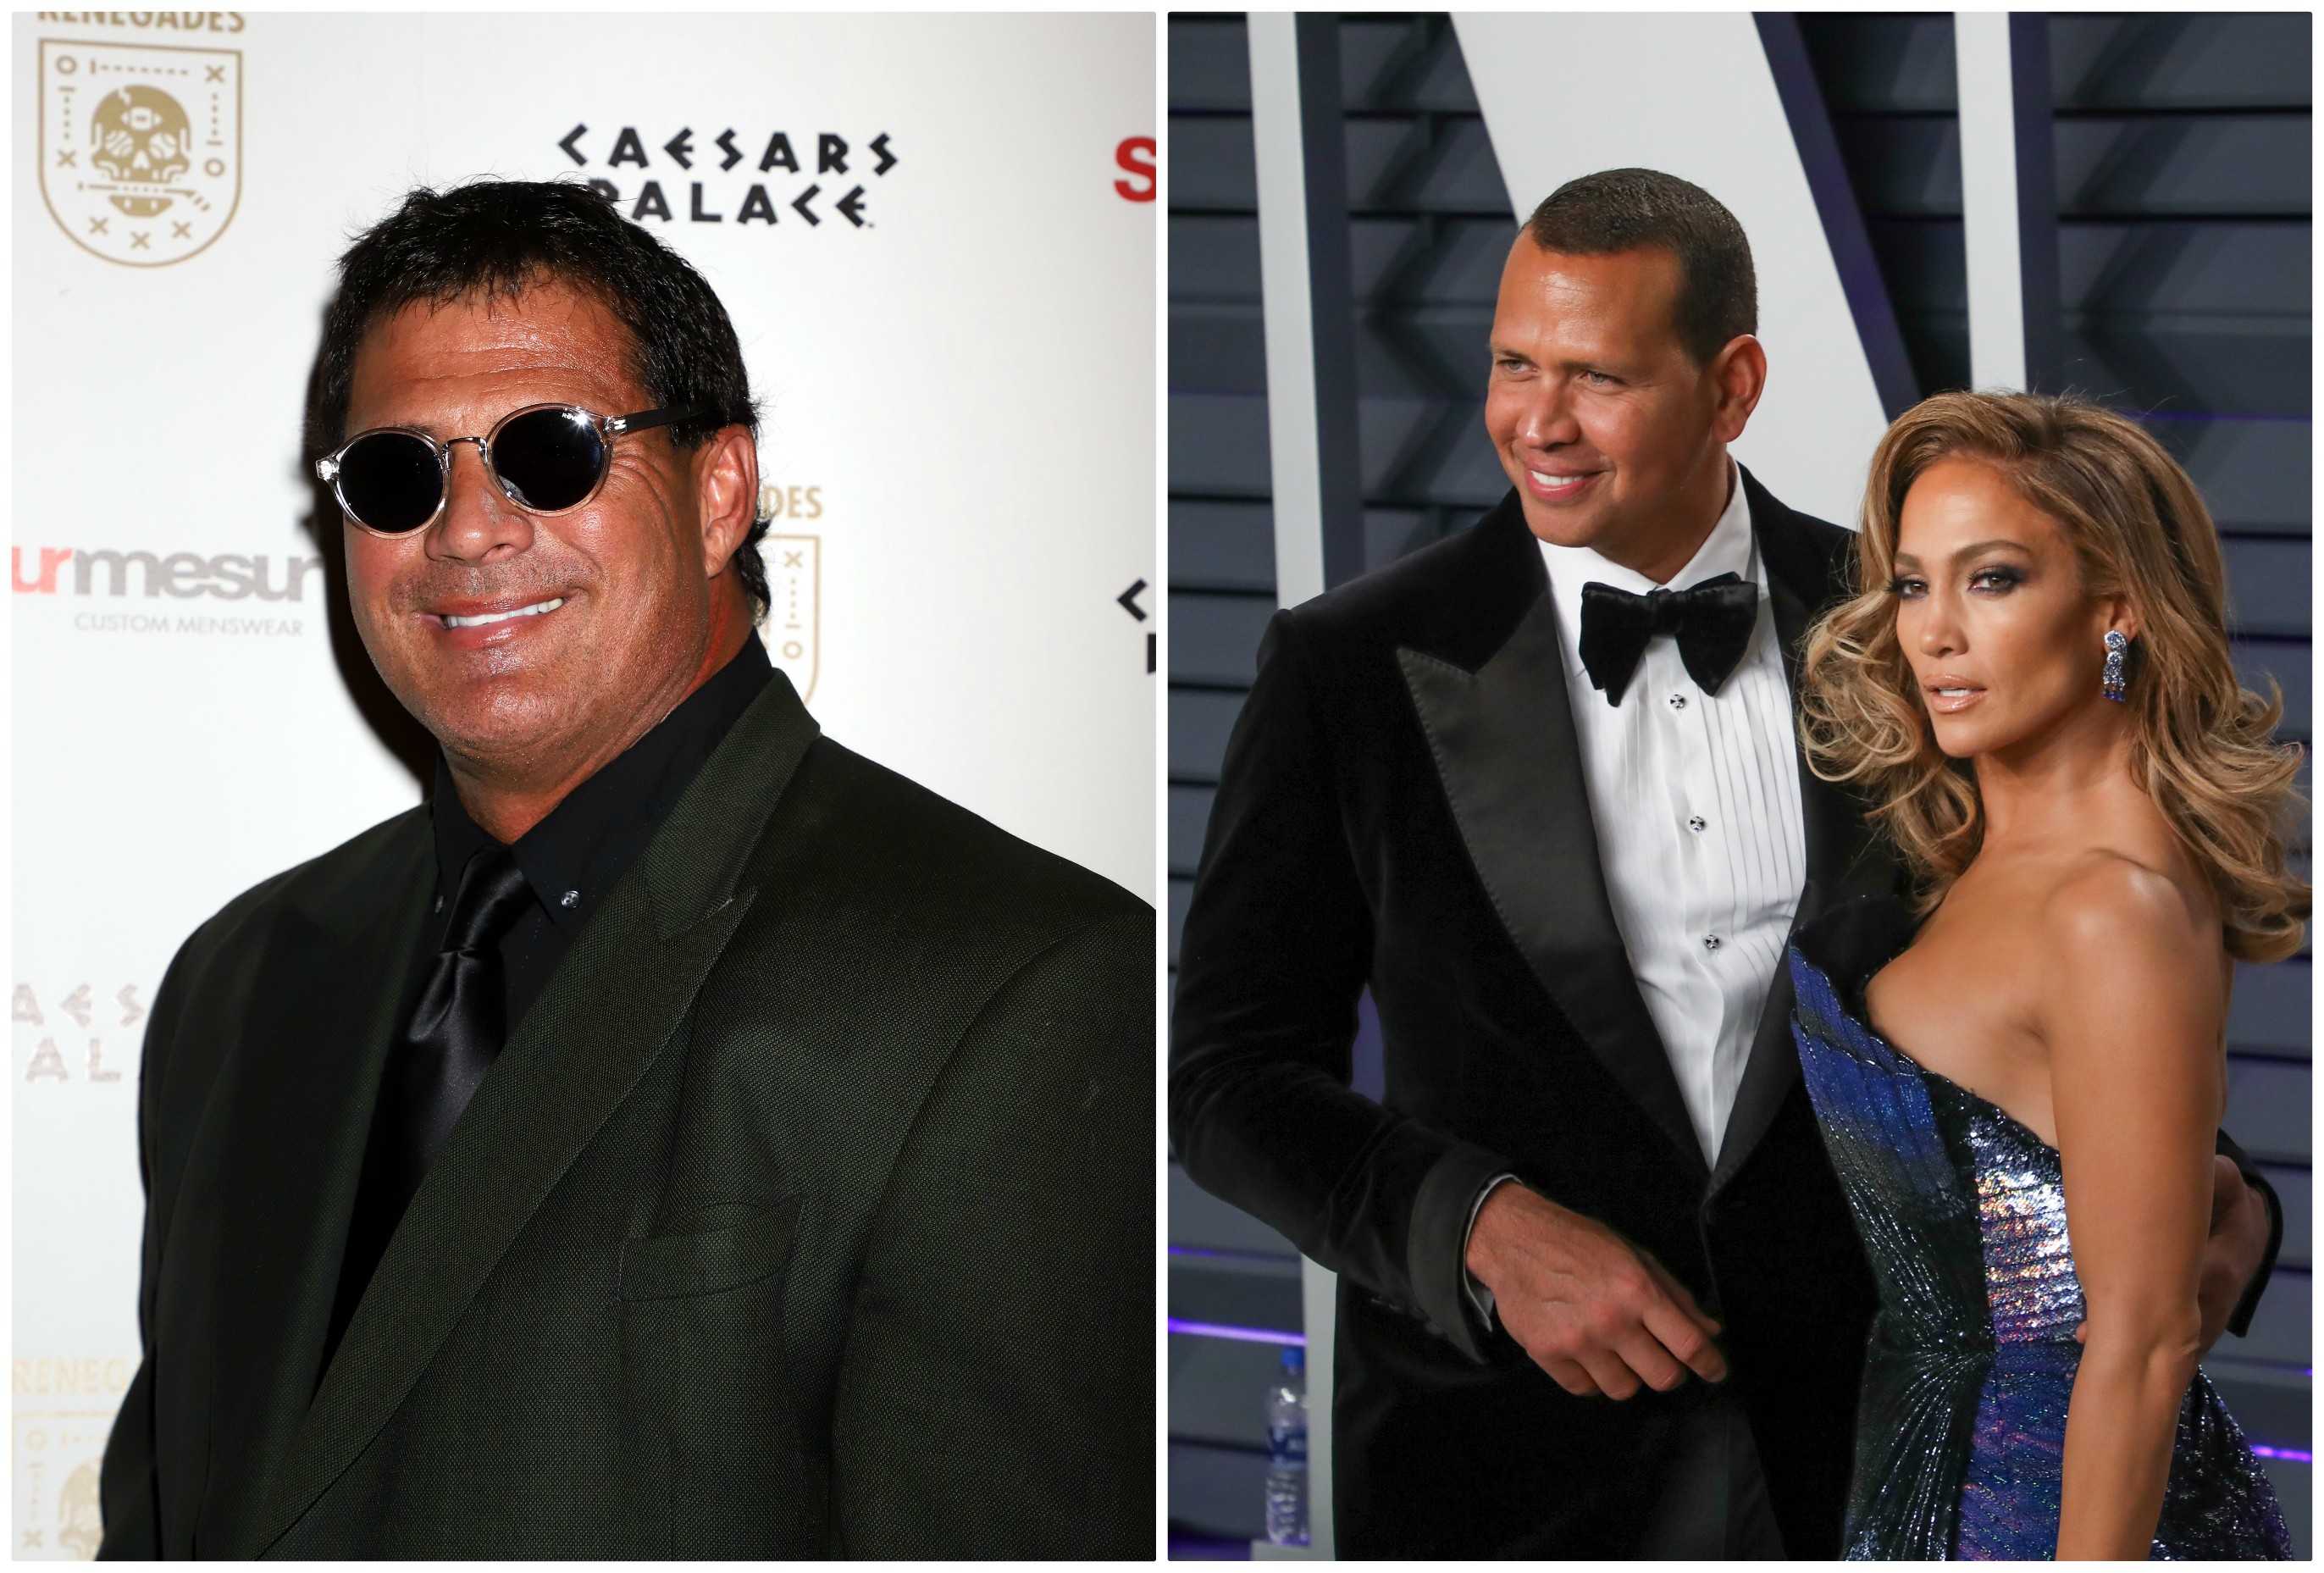 José What'd You See? Canseco Alleges A-Rod Cheated On J.Lo With